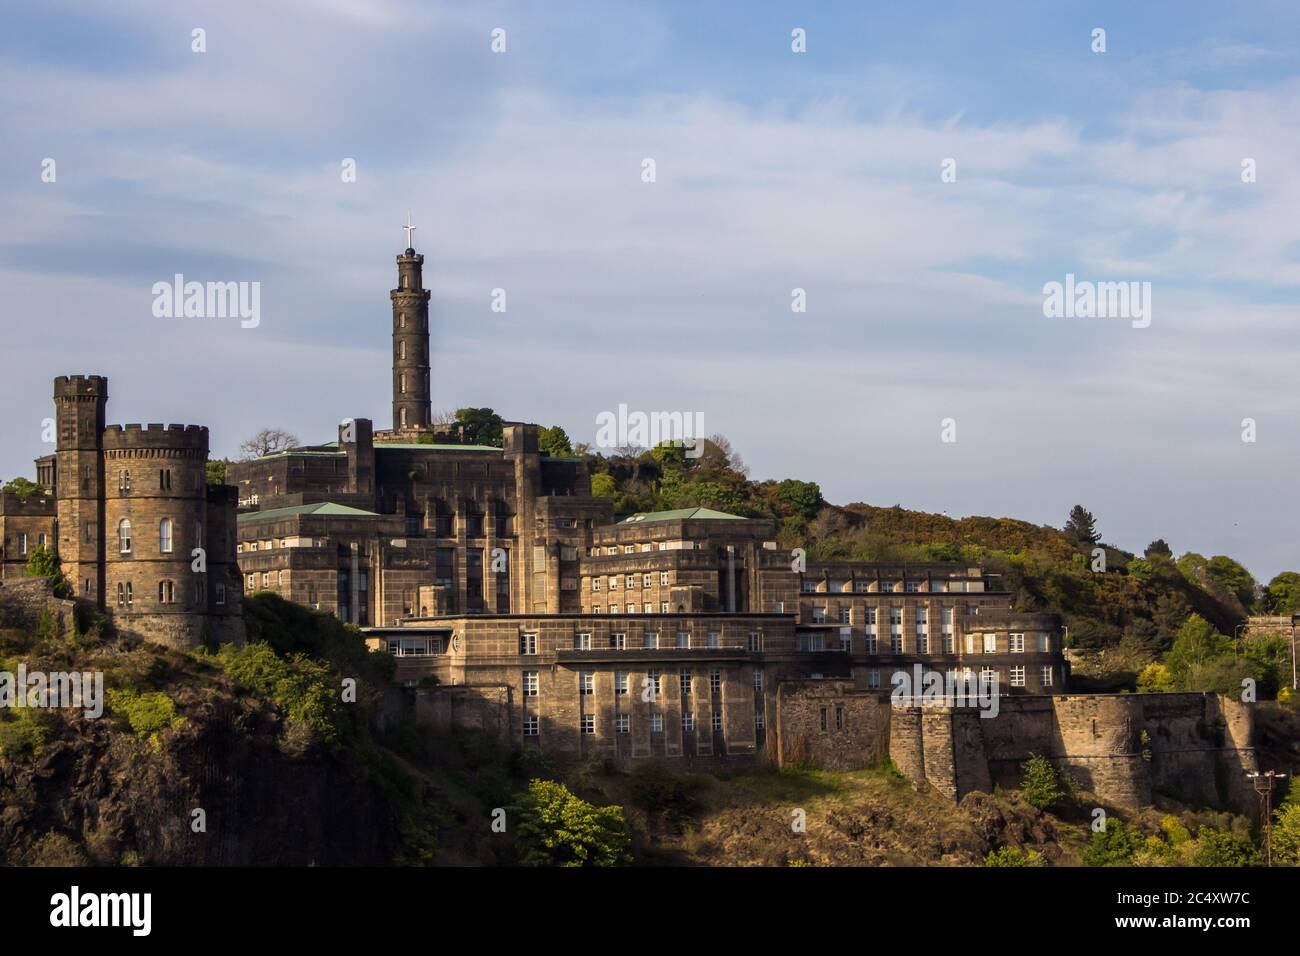 St Andrews house on Calton hill as seen from the Waverly Train Station, Edinburgh, with the Nelson tower in the background Stock Photo